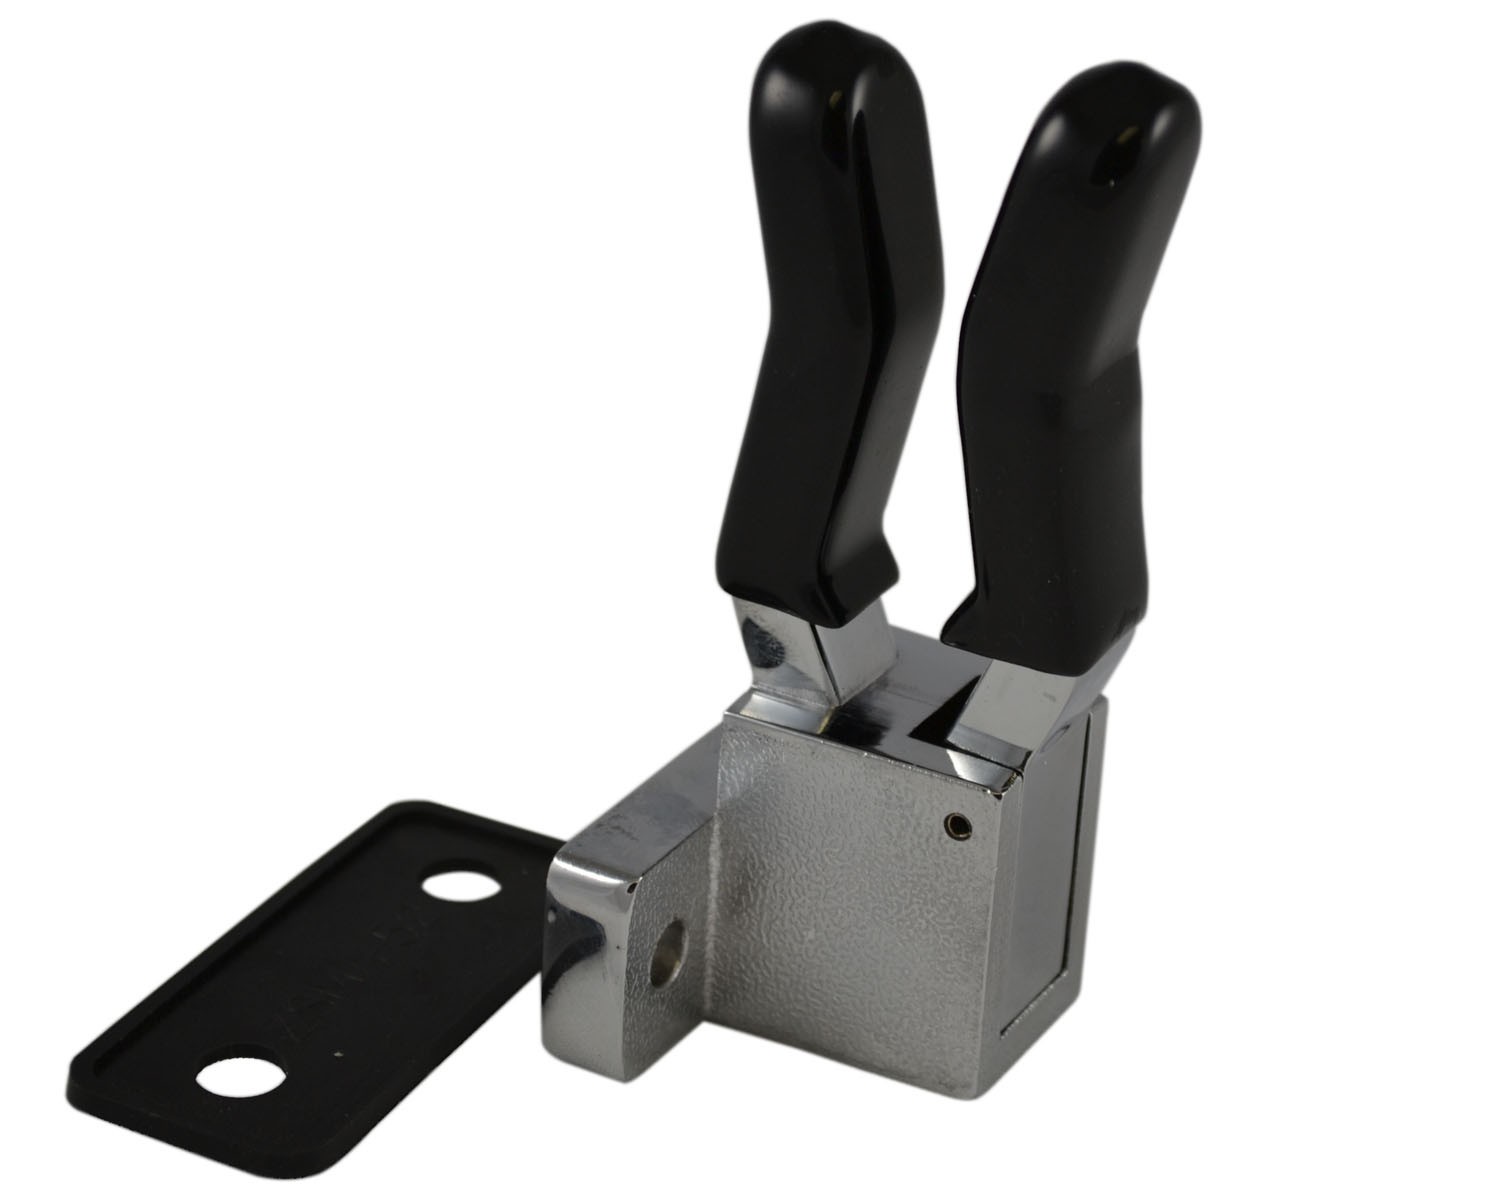 ZSMA52, Axe Handle Bracket Side Mount Zinc Chrome Plated with Finger Sleeves, Equipment Mounting Bracket